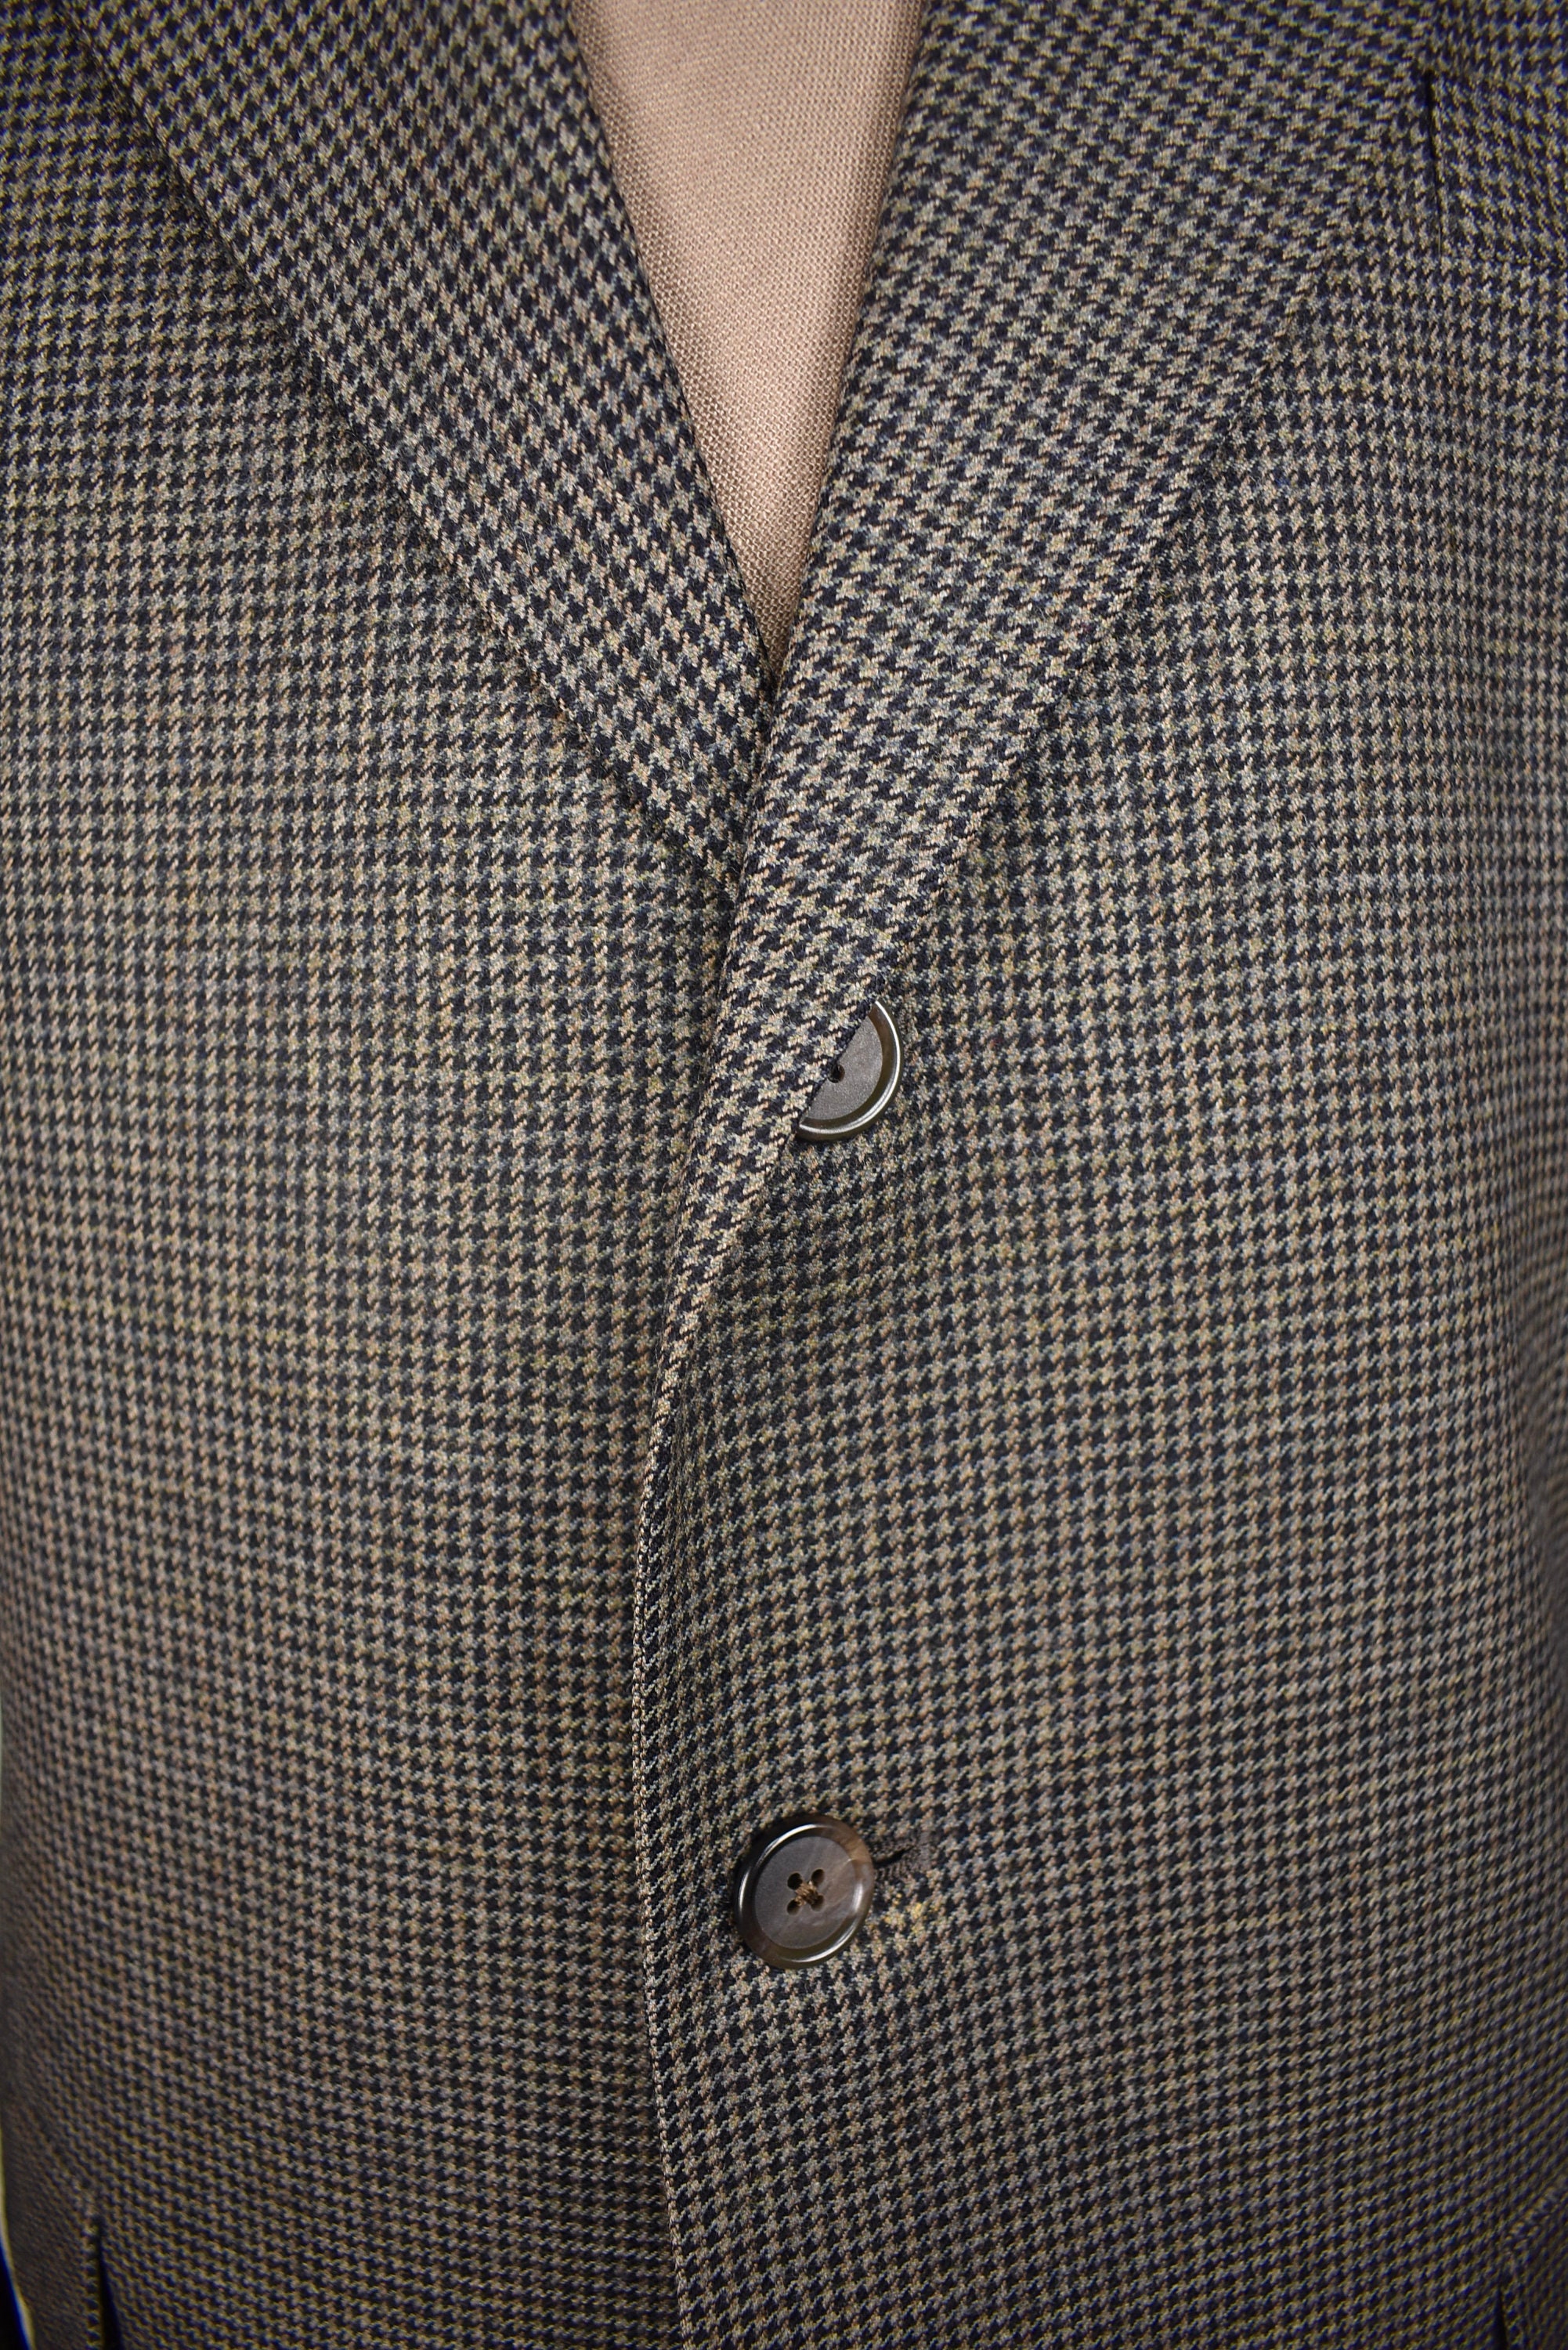 Hart Schaffner Marx Brown Houndstooth Worsted Wool Two Button - Etsy